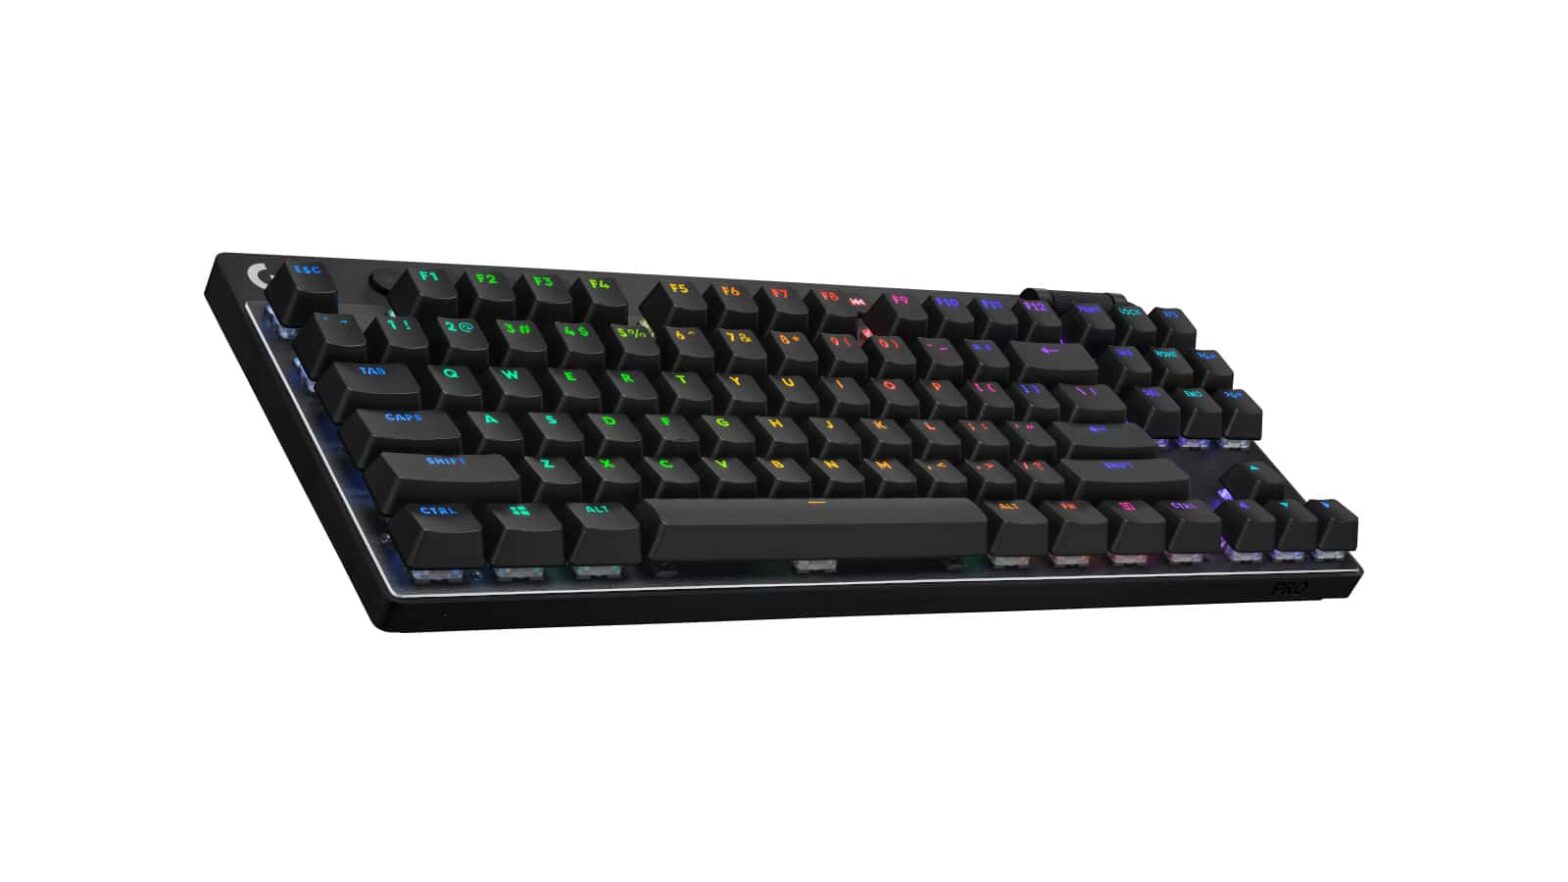 Logitech's new Pro X gaming keyboard ditches cables for $199